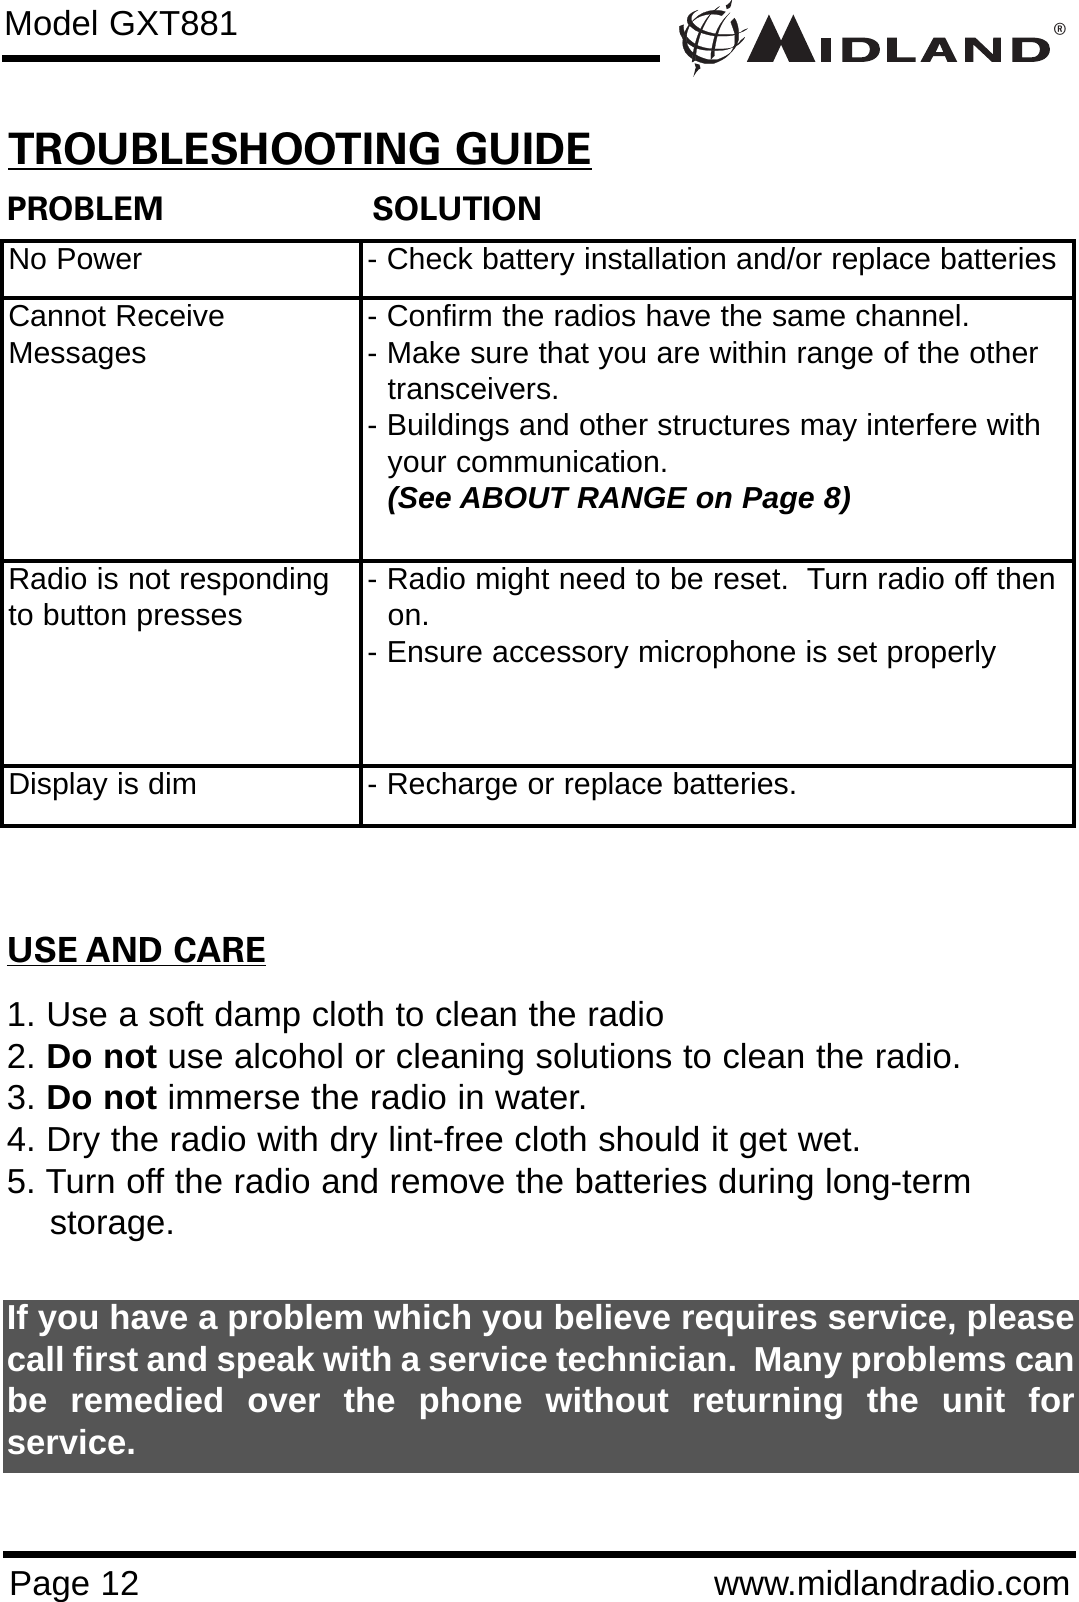 ®Page 12 www.midlandradio.comPROBLEM                     SOLUTIONNo Power - Check battery installation and/or replace batteriesCannot ReceiveMessages - Confirm the radios have the same channel.      - Make sure that you are within range of the other transceivers.- Buildings and other structures may interfere with your communication. (See ABOUT RANGE on Page 8)Radio is not respondingto button presses - Radio might need to be reset.  Turn radio off then on.- Ensure accessory microphone is set properlyDisplay is dim - Recharge or replace batteries.USE AND CARE1. Use a soft damp cloth to clean the radio2. Do not use alcohol or cleaning solutions to clean the radio.3. Do not immerse the radio in water.4. Dry the radio with dry lint-free cloth should it get wet.5. Turn off the radio and remove the batteries during long-term    storage.If you have a problem which you believe requires service, pleasecall first and speak with a service technician.  Many problems canbe remedied over the phone without returning the unit forservice.Model GXT881TROUBLESHOOTING GUIDE